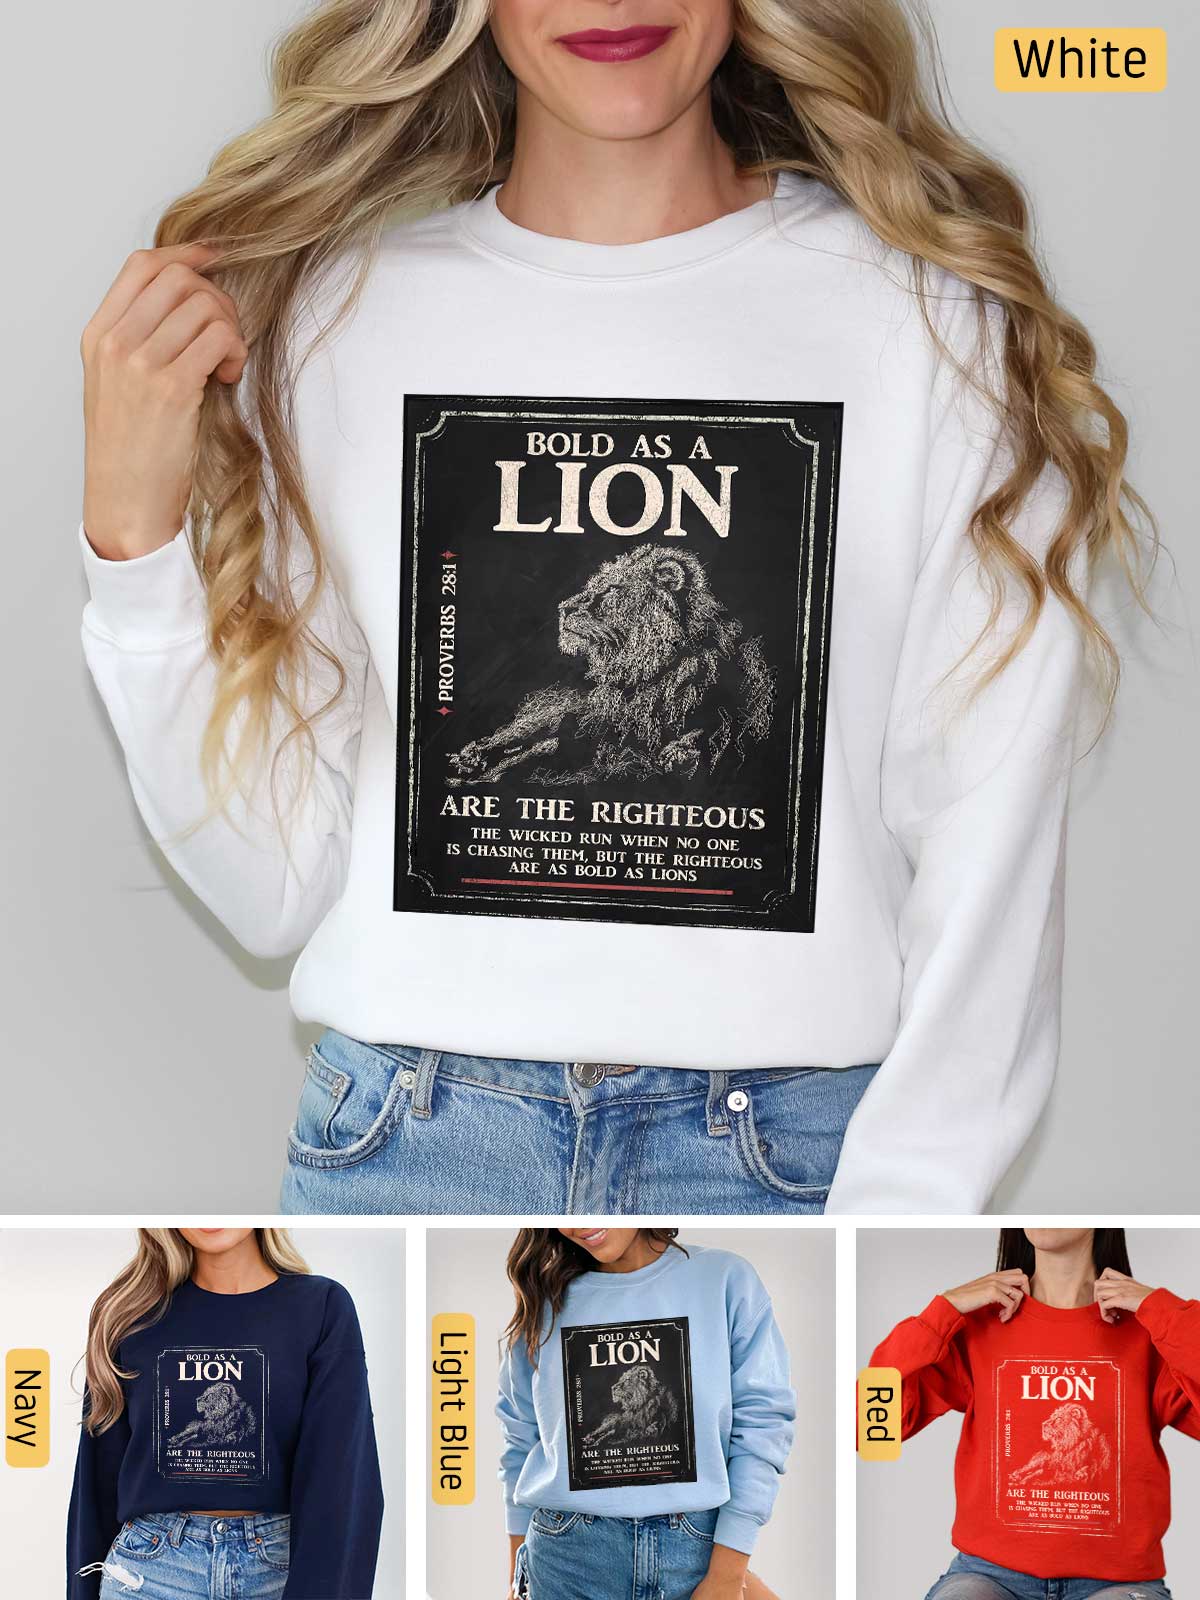 a woman wearing a lion sweatshirt and jeans